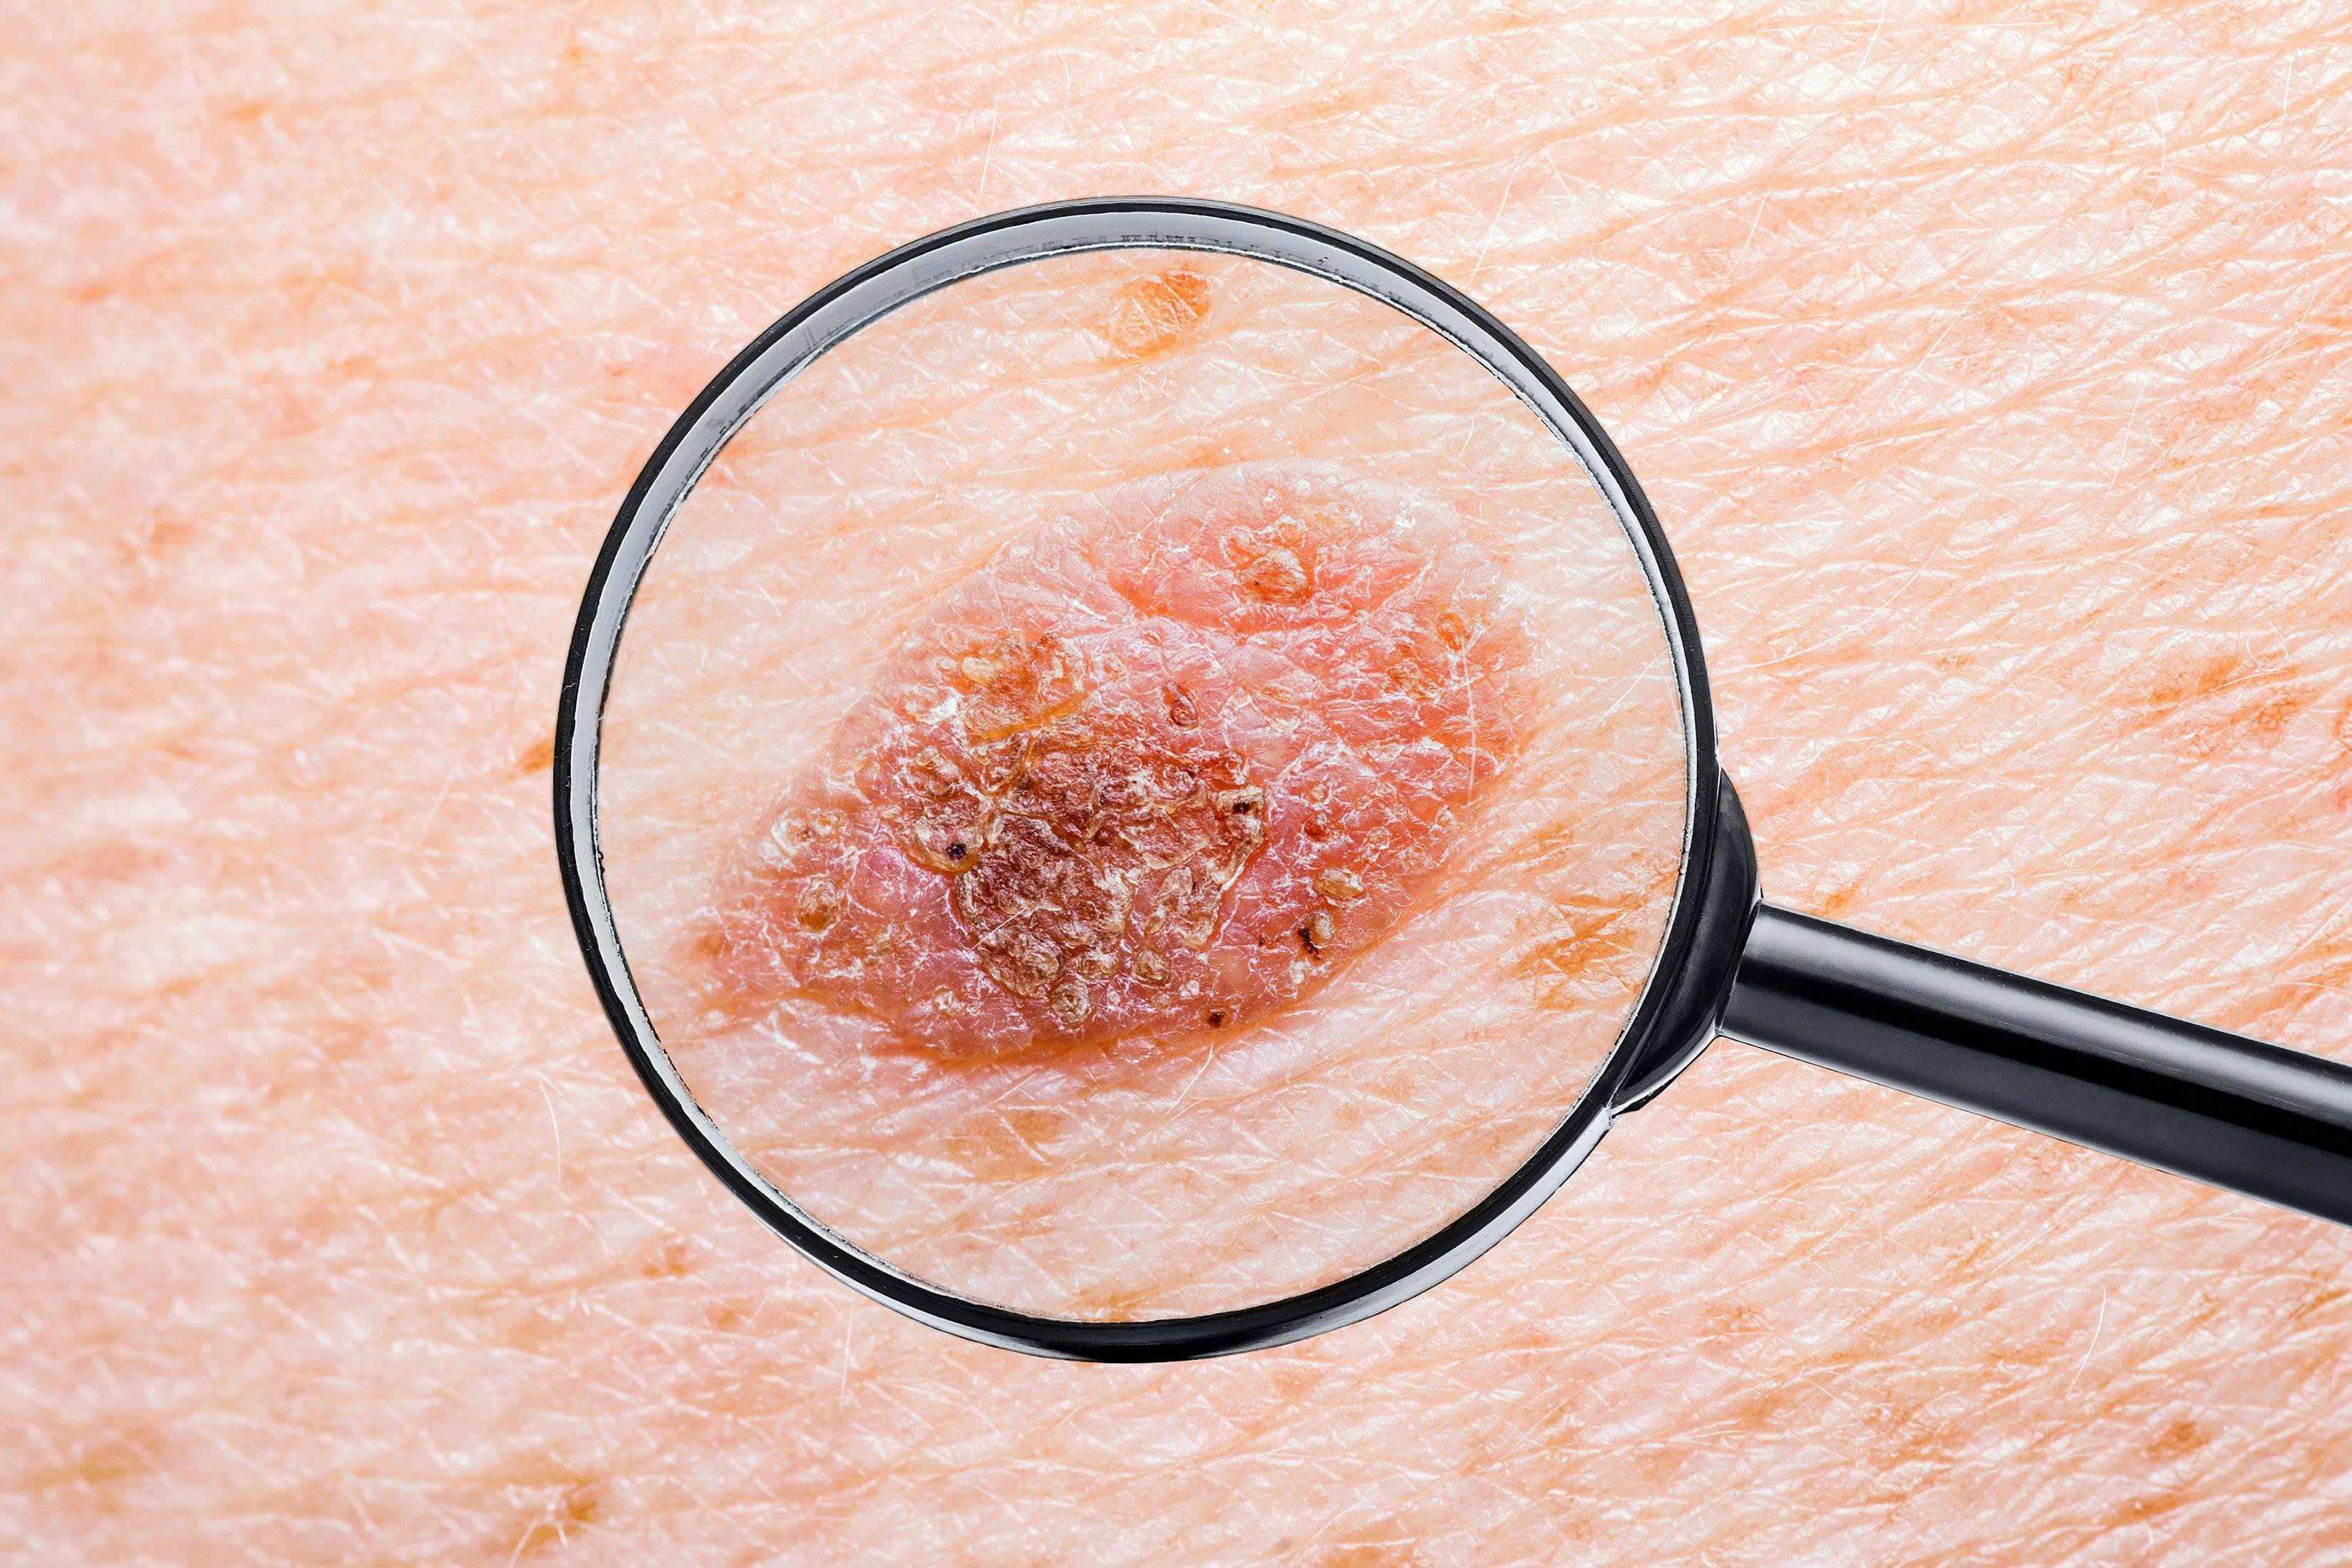 Study: Skin Cancer Detection Apps Fail to Correctly Classify Life-Threatening Cancers